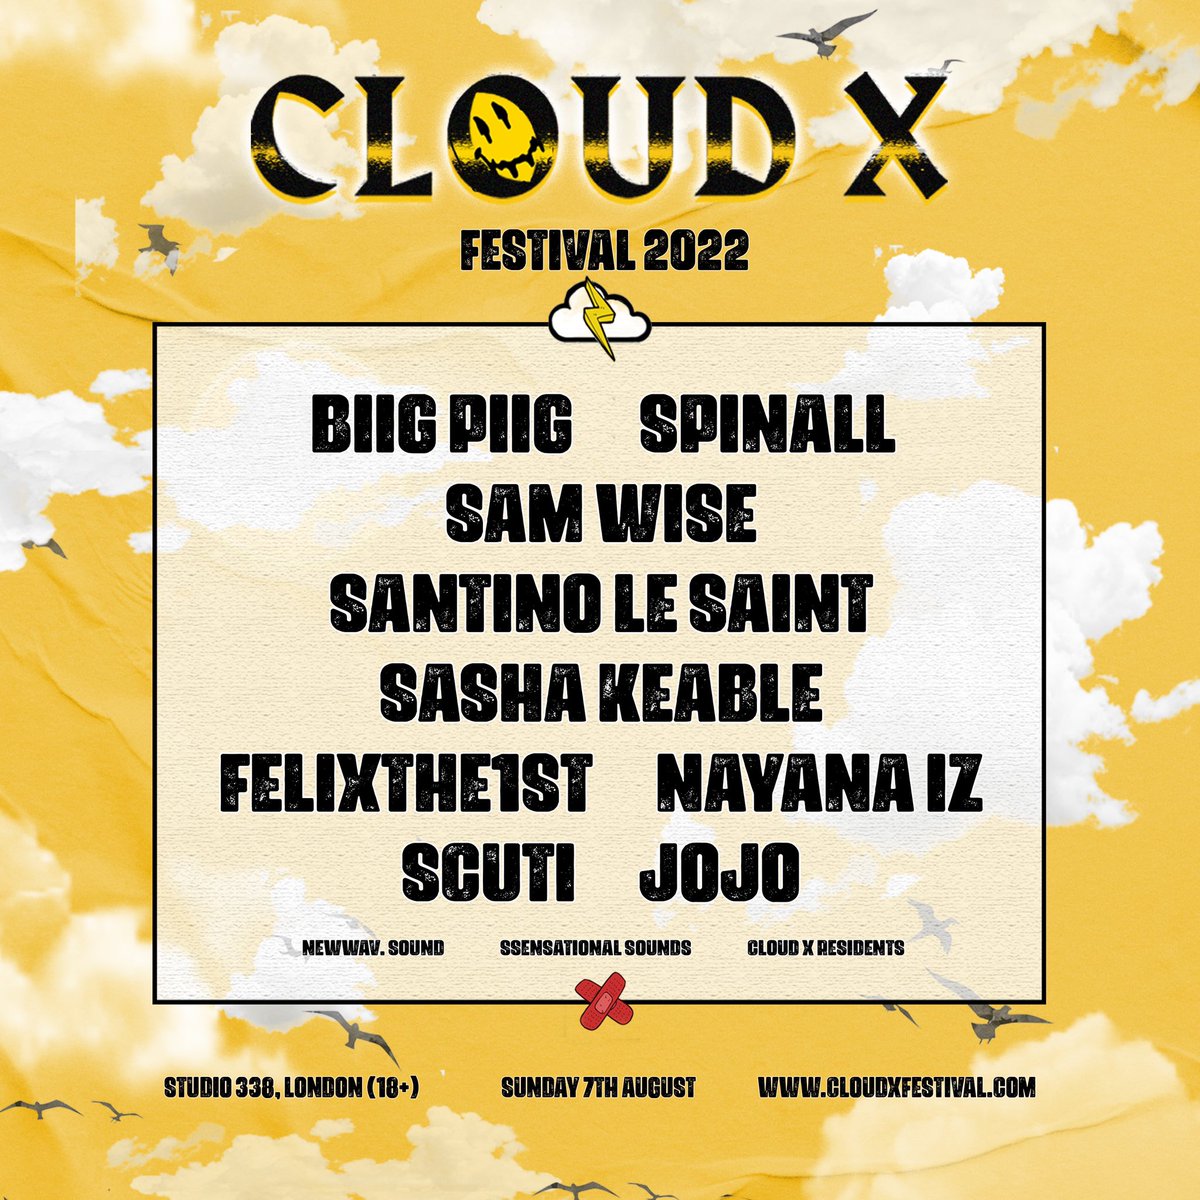 Tell a friend to tell a friend ✨ We are proud to announce our line-up for this year’s Cloud X Festival. Sign up for pre-sale WEDNESDAY here: cloudxfestival.com